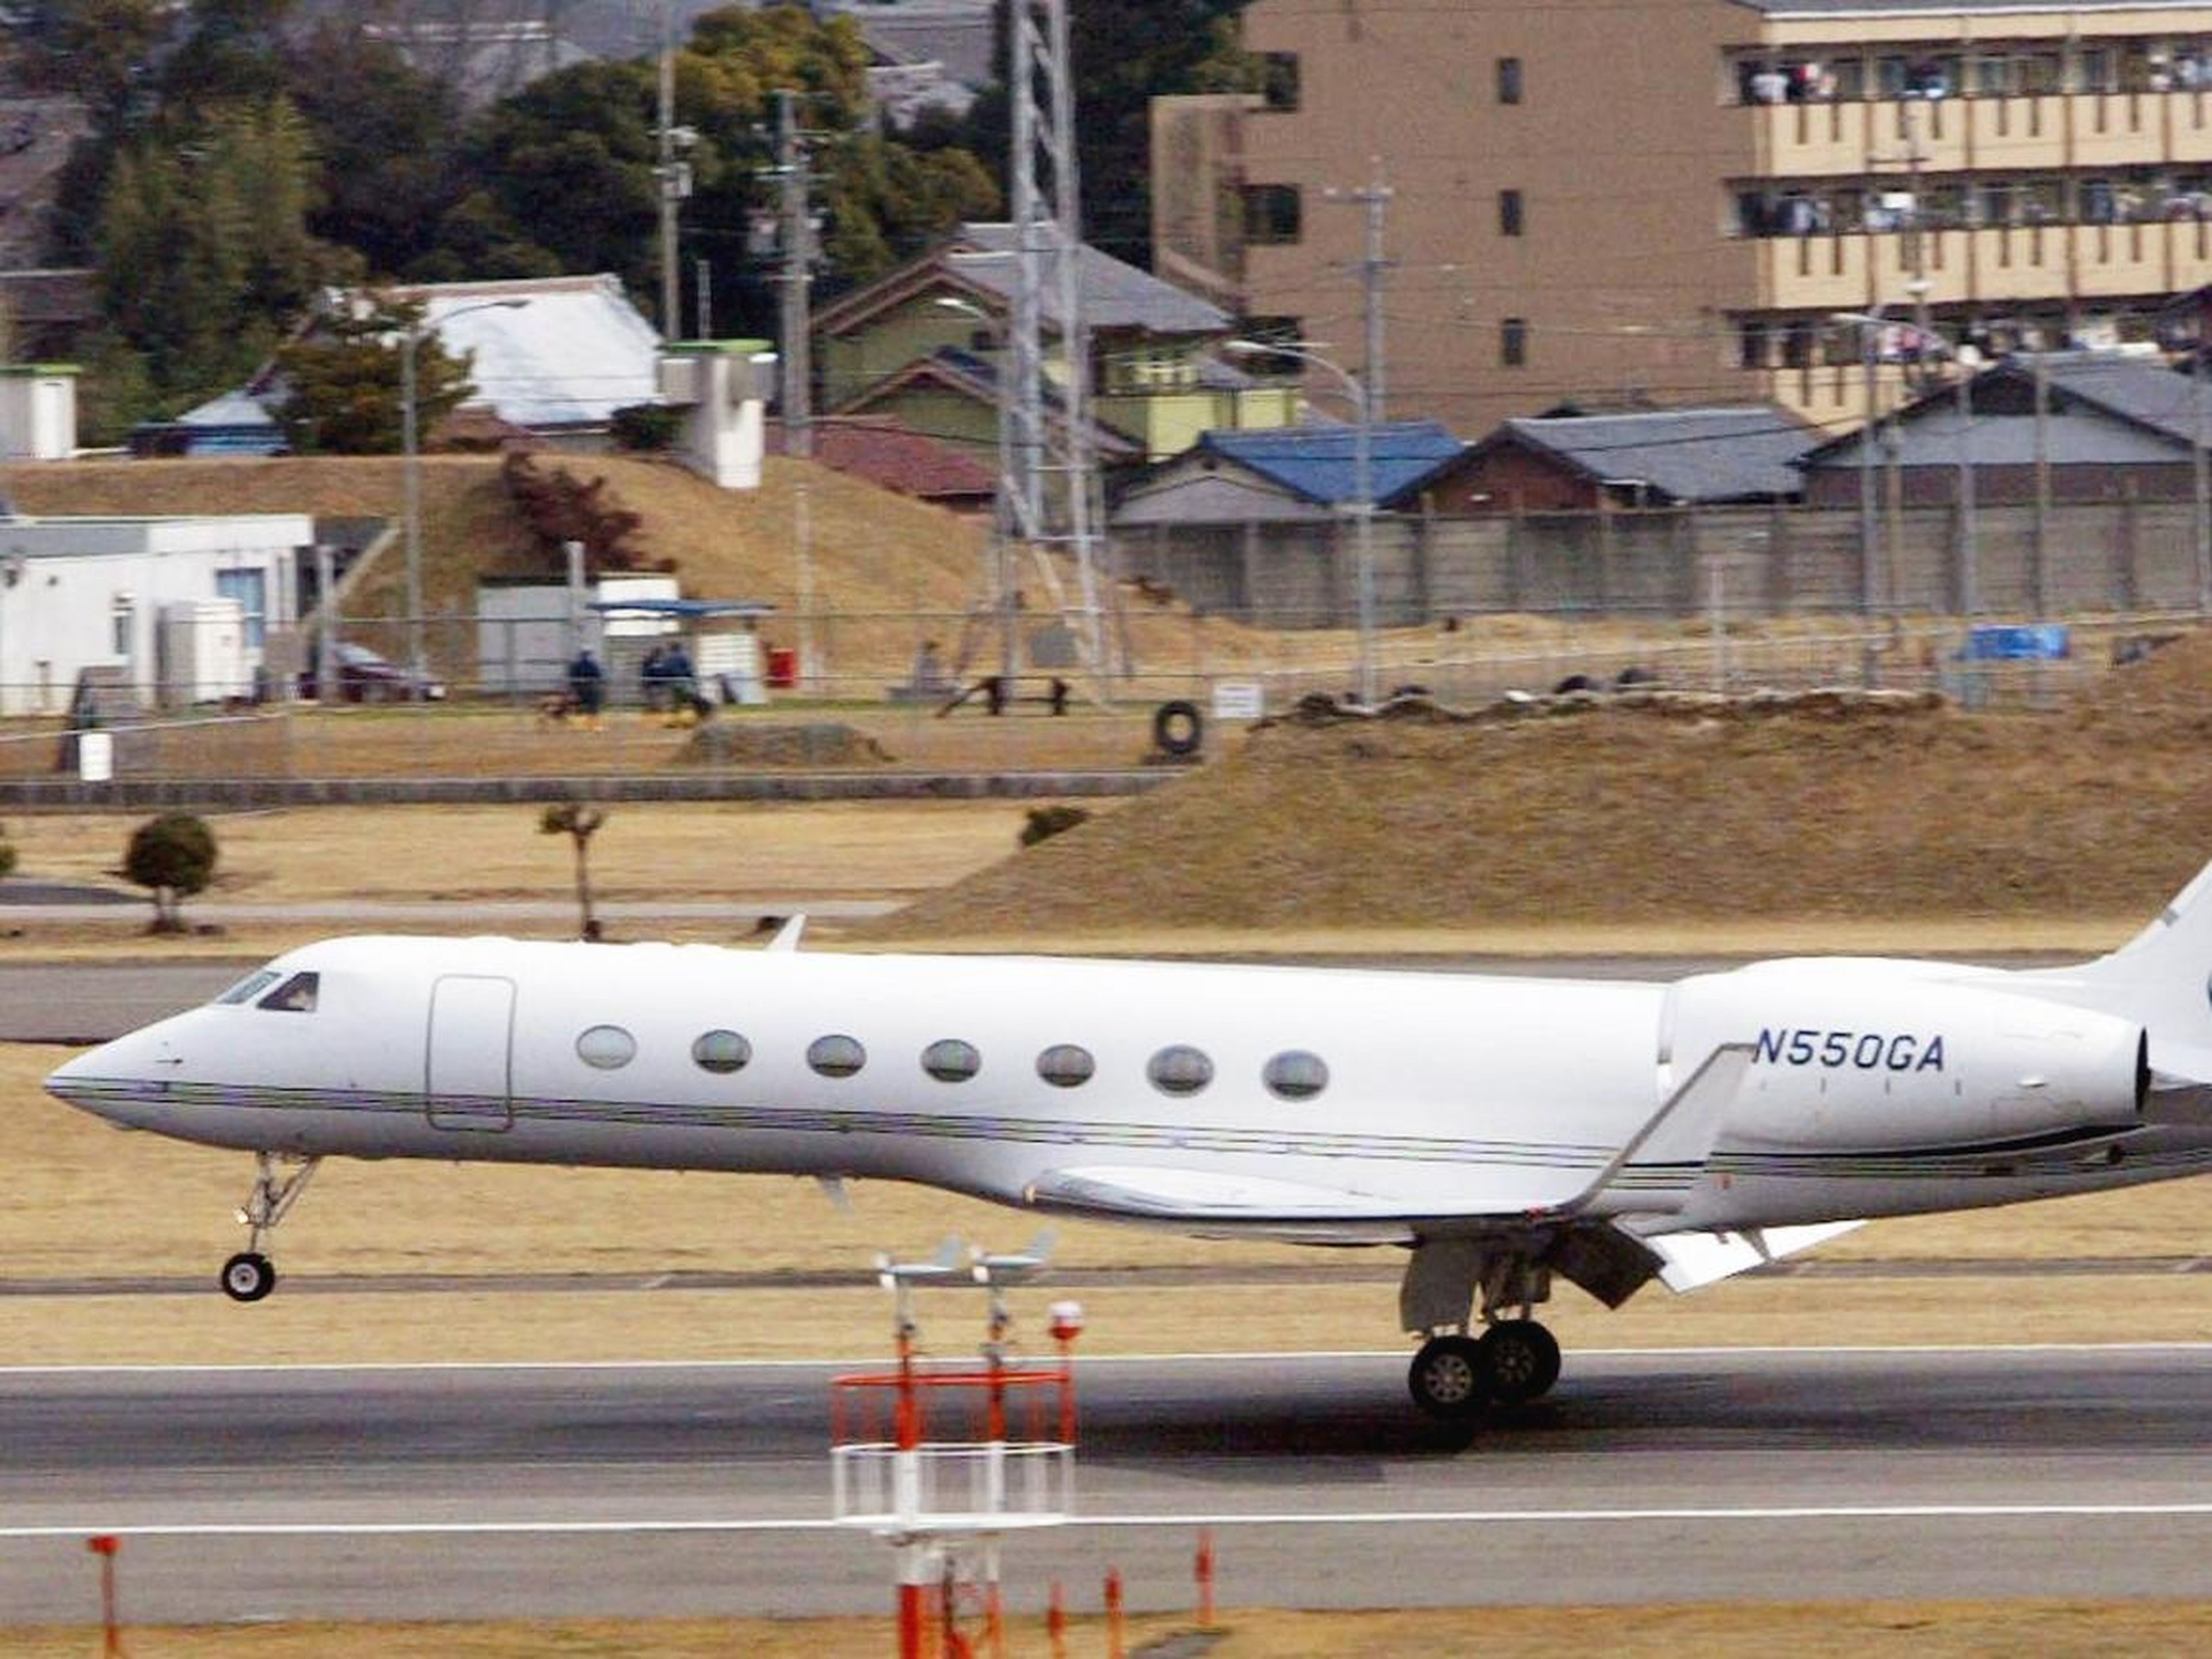 The Gulfstream GV debuted back in 1998. In 2004, Gulfstream introduced an updated version of the plane called the G550.